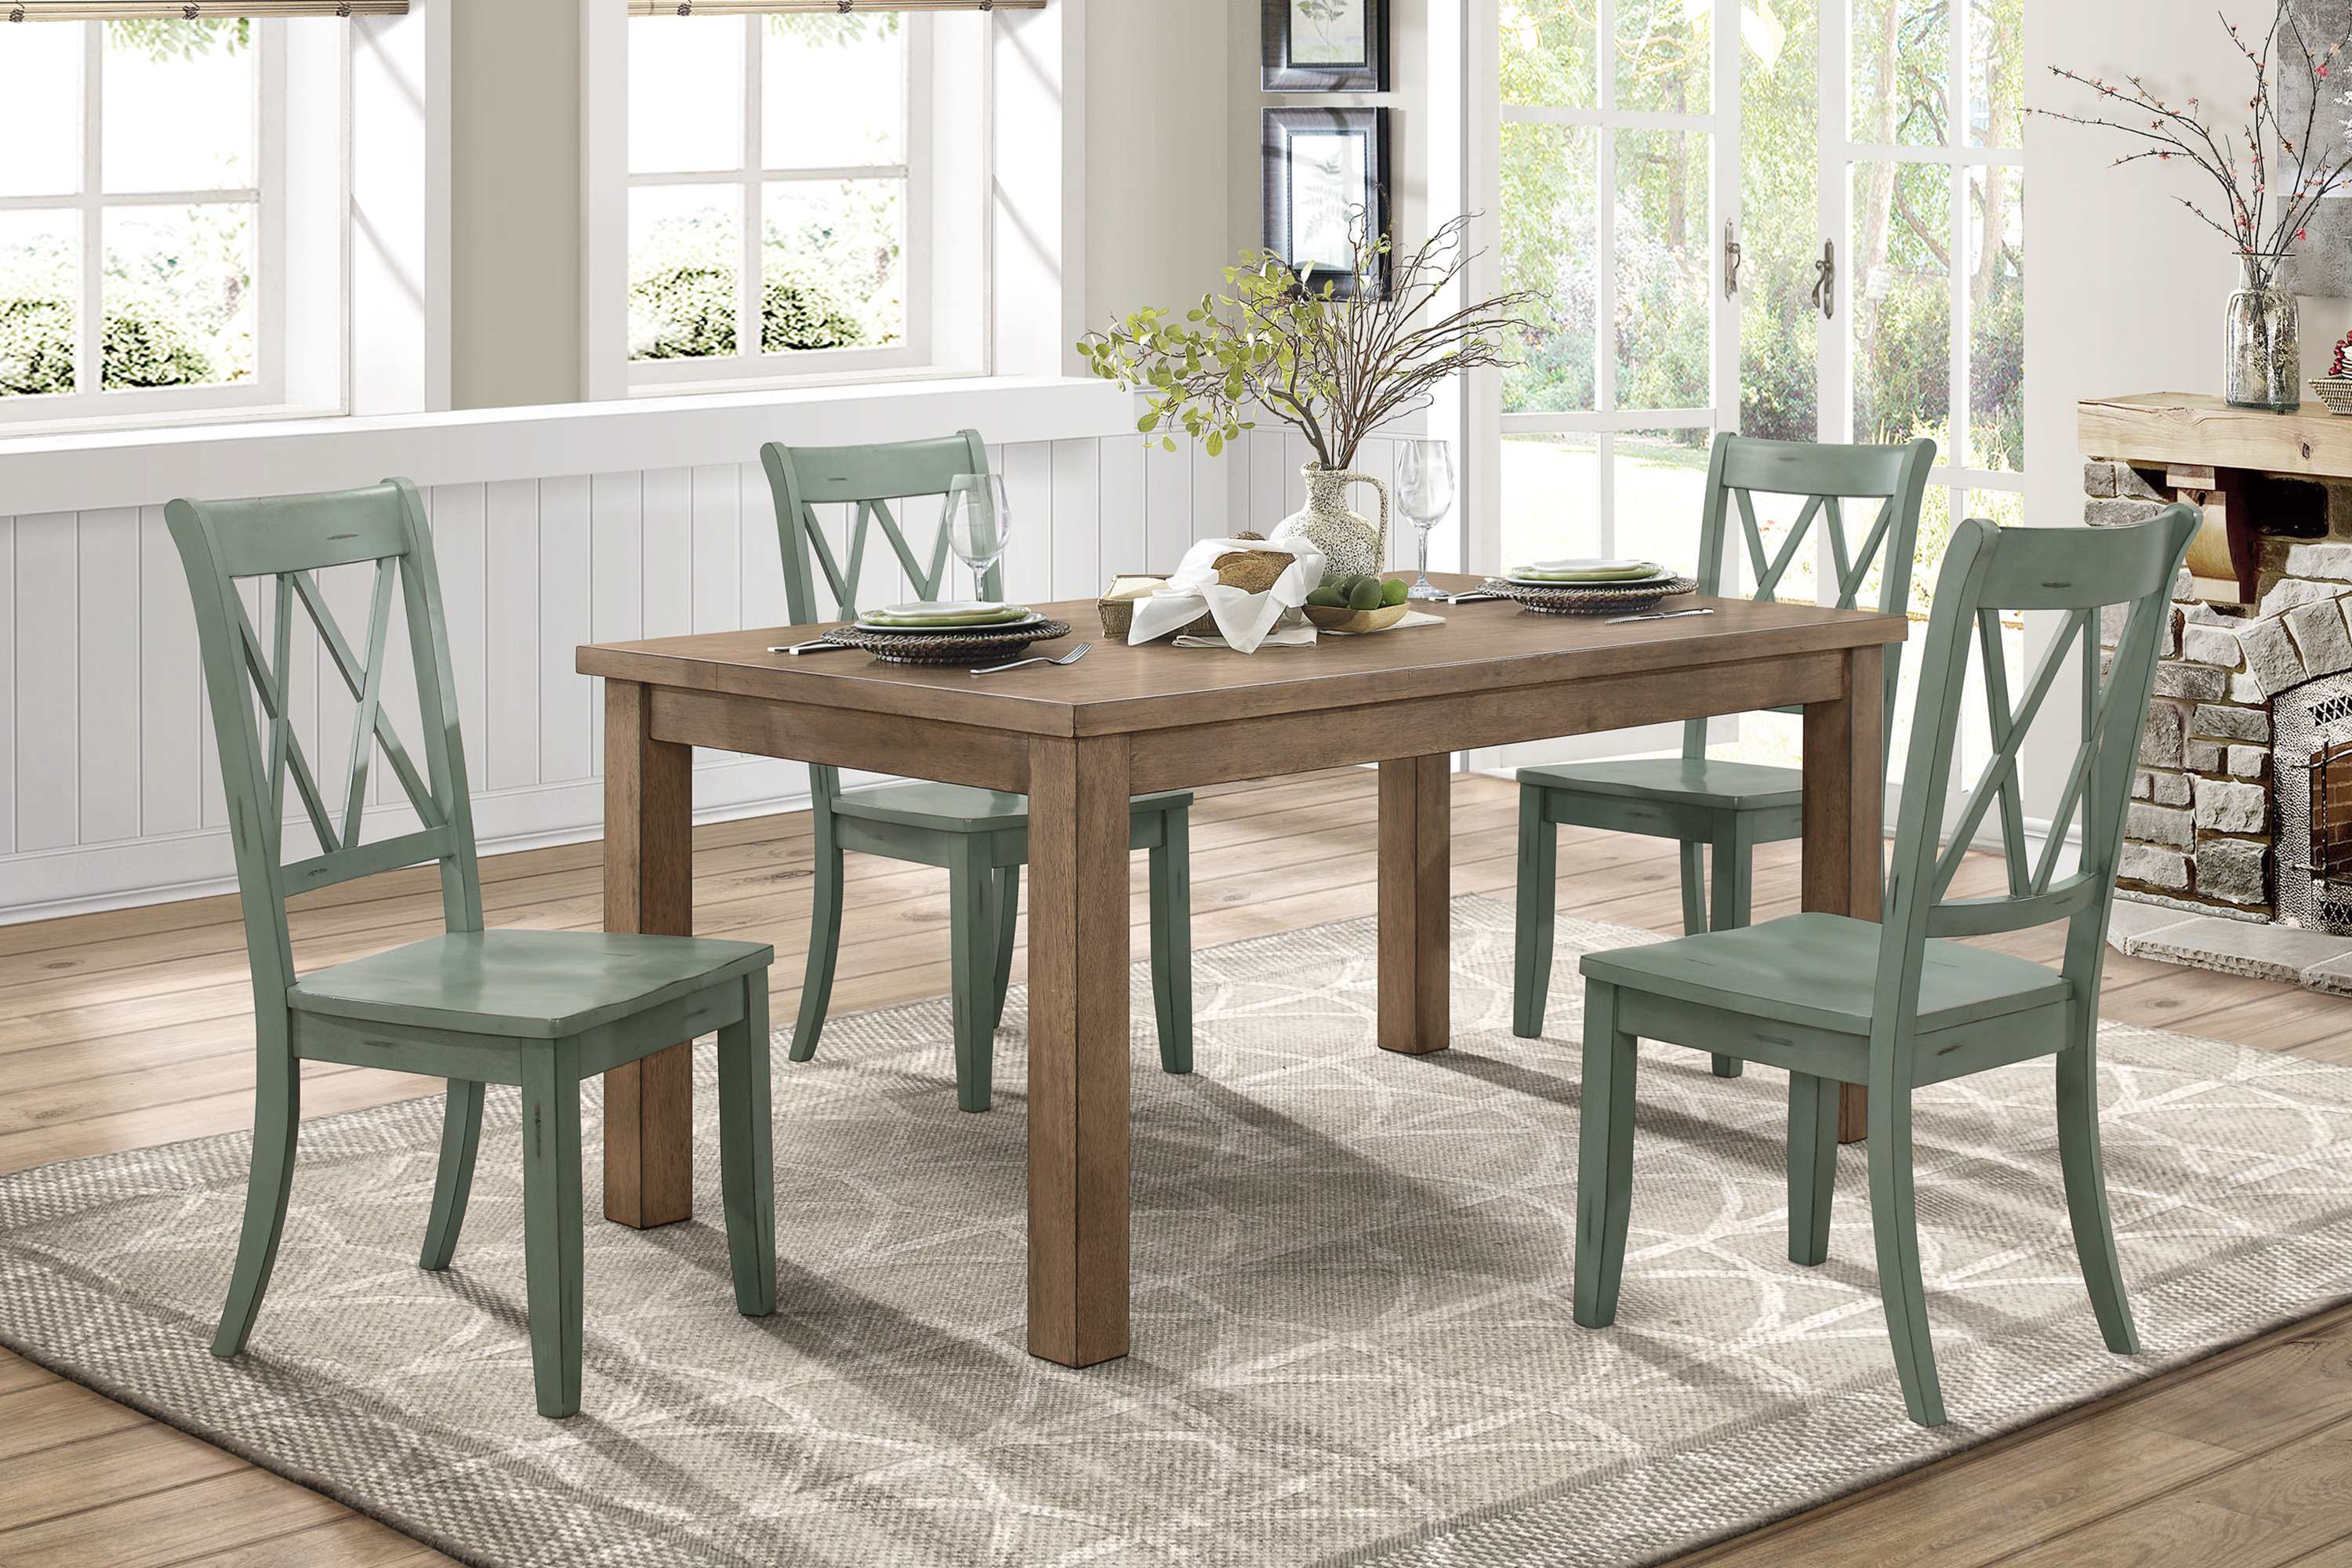 Janina Teal Chair Set Of 2 5516